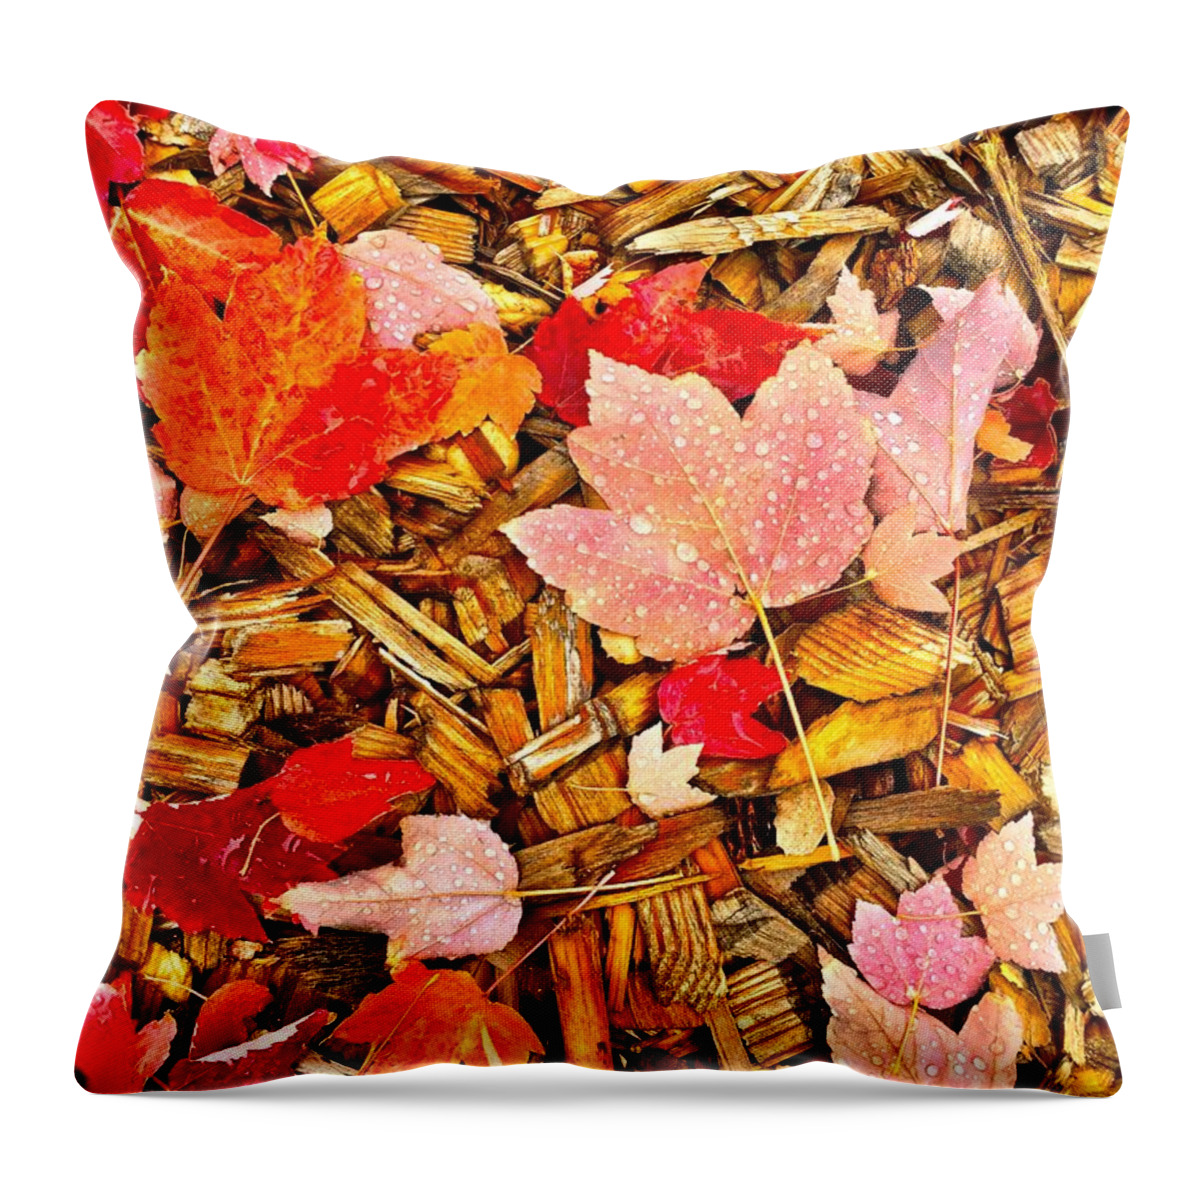 Dew Drops Throw Pillow featuring the photograph Autumn Potpourri by Brad Hodges